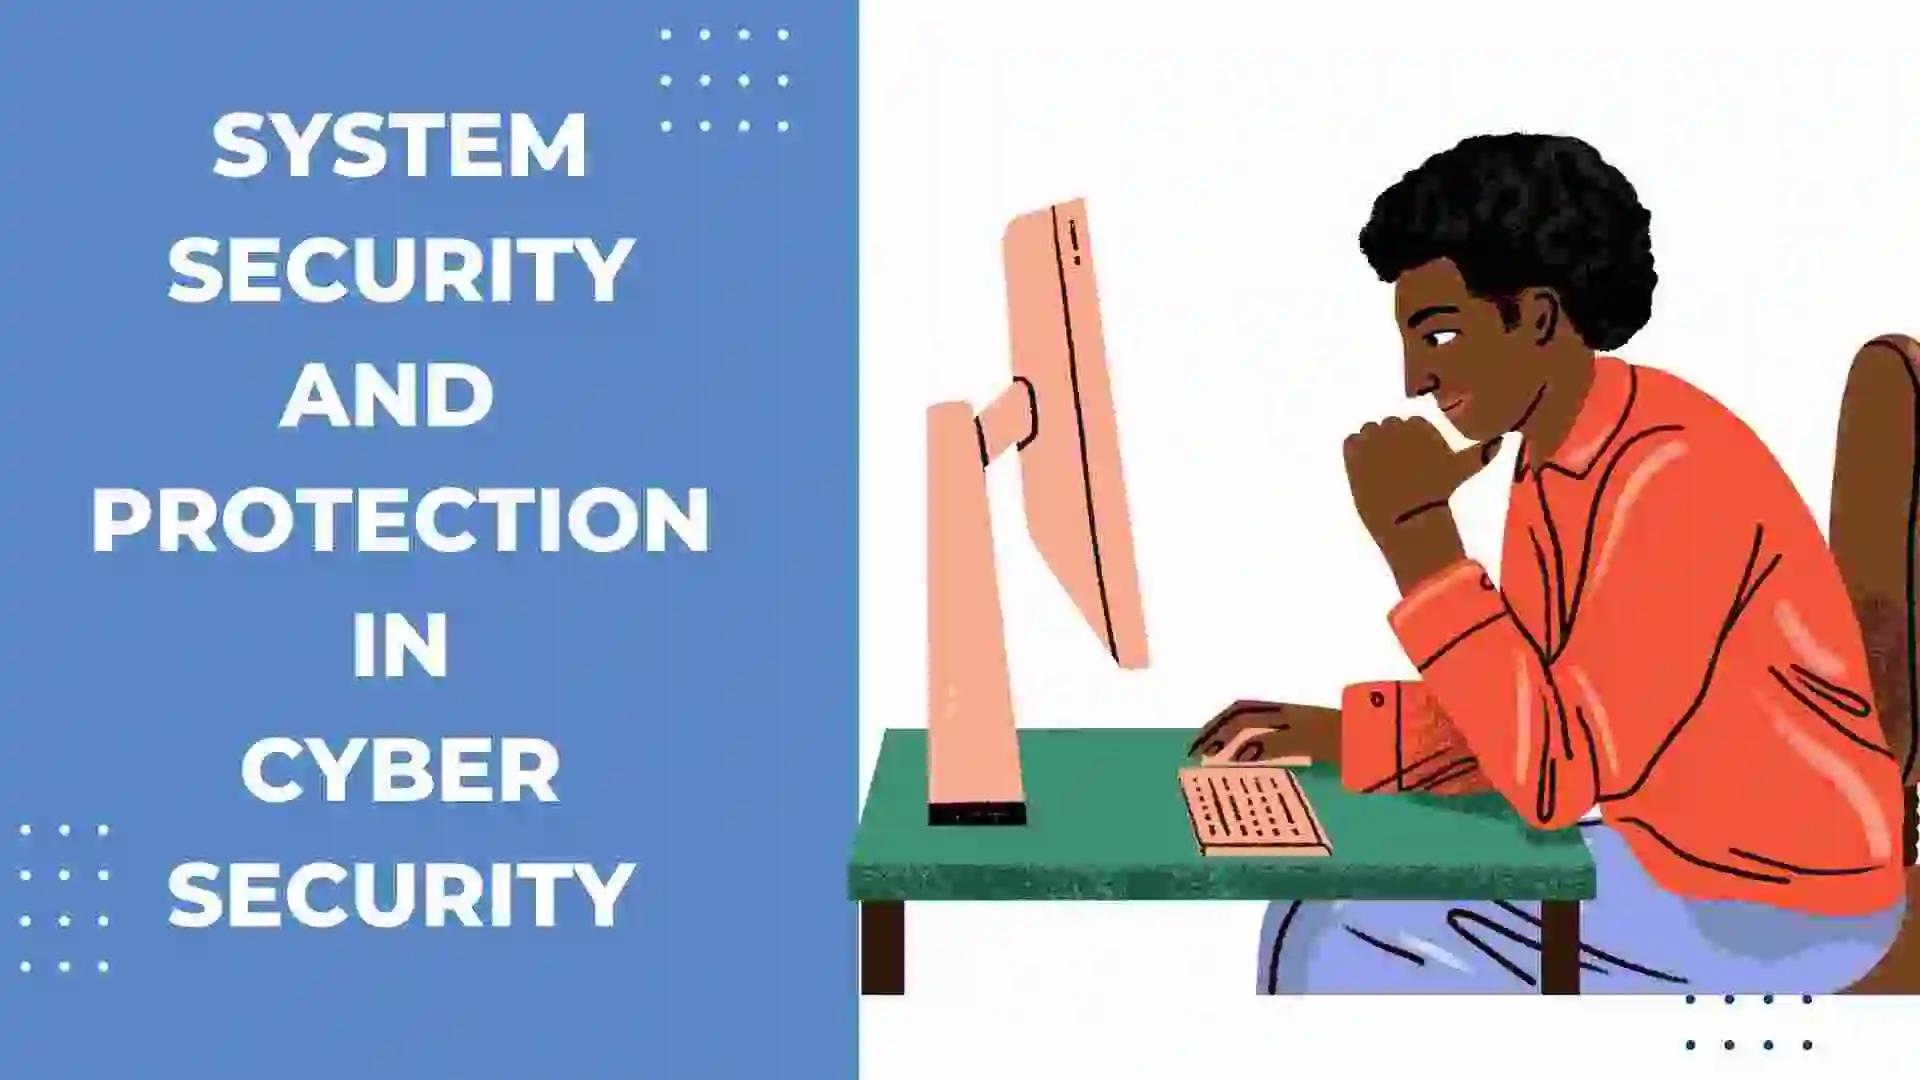 System security focuses on protecting computer systems, networks, and data from unauthorized access, attacks, and other potential threats.